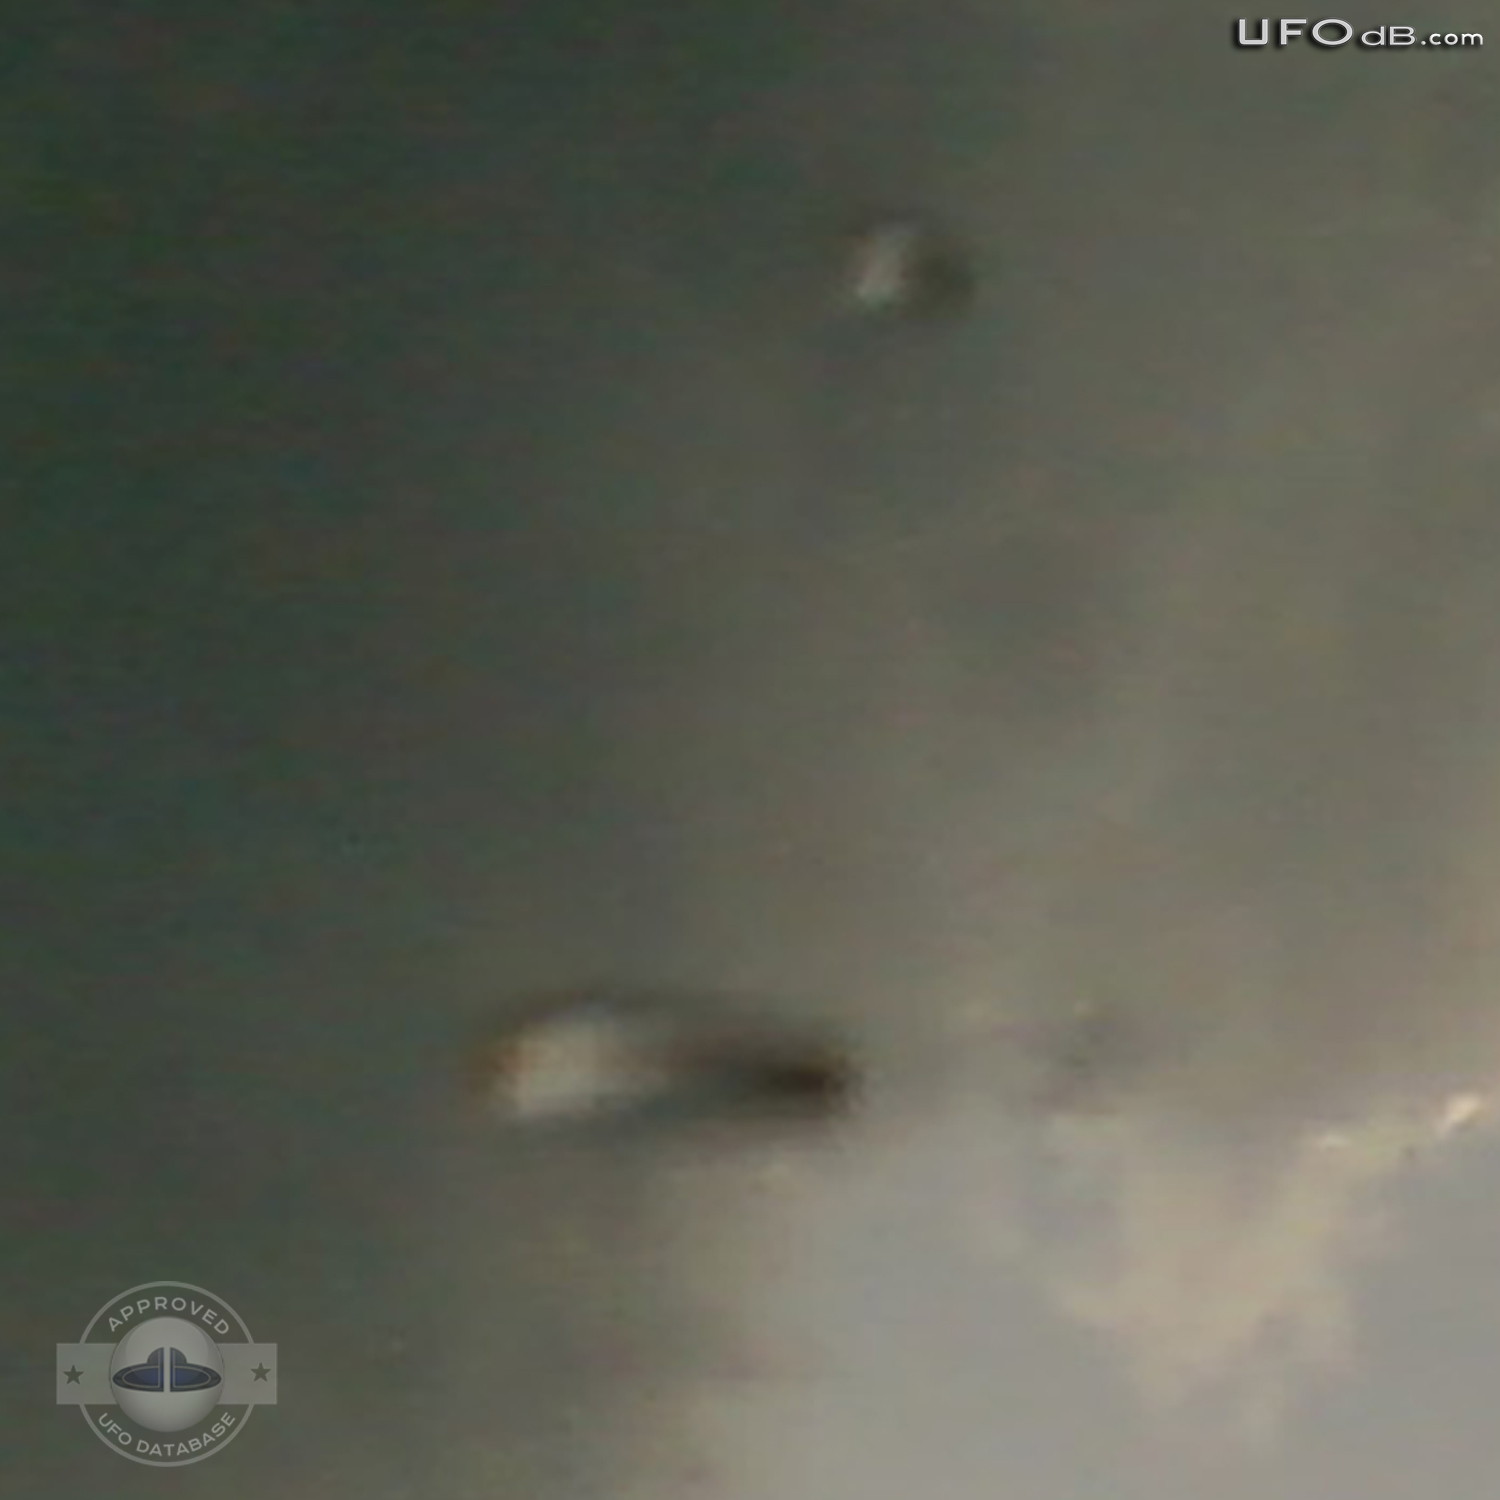 Fort Worth Texas Storm Picture reveals UFOs near clouds | May 24 2011 UFO Picture #343-4